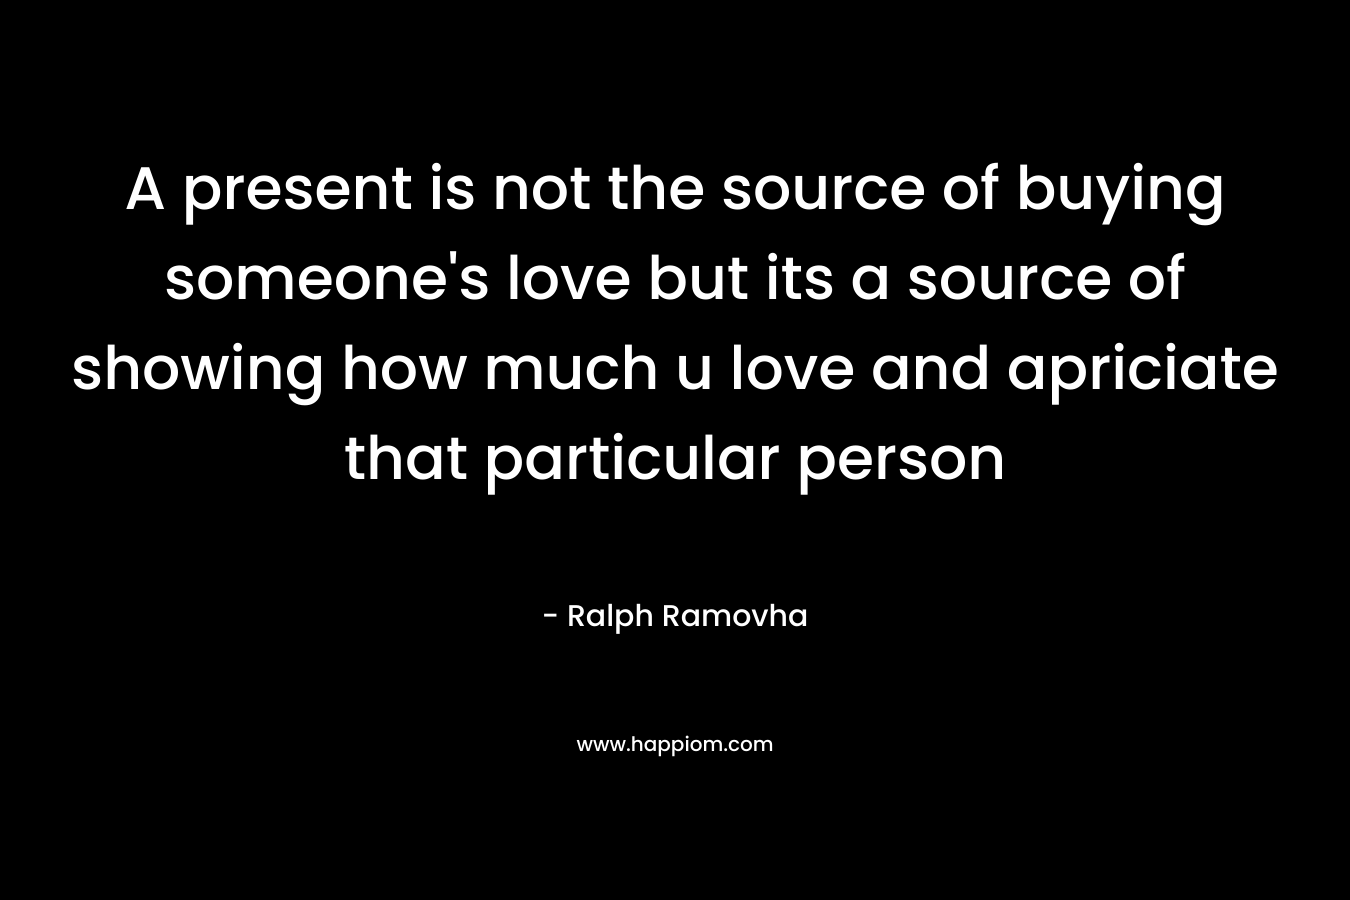 A present is not the source of buying someone's love but its a source of showing how much u love and apriciate that particular person